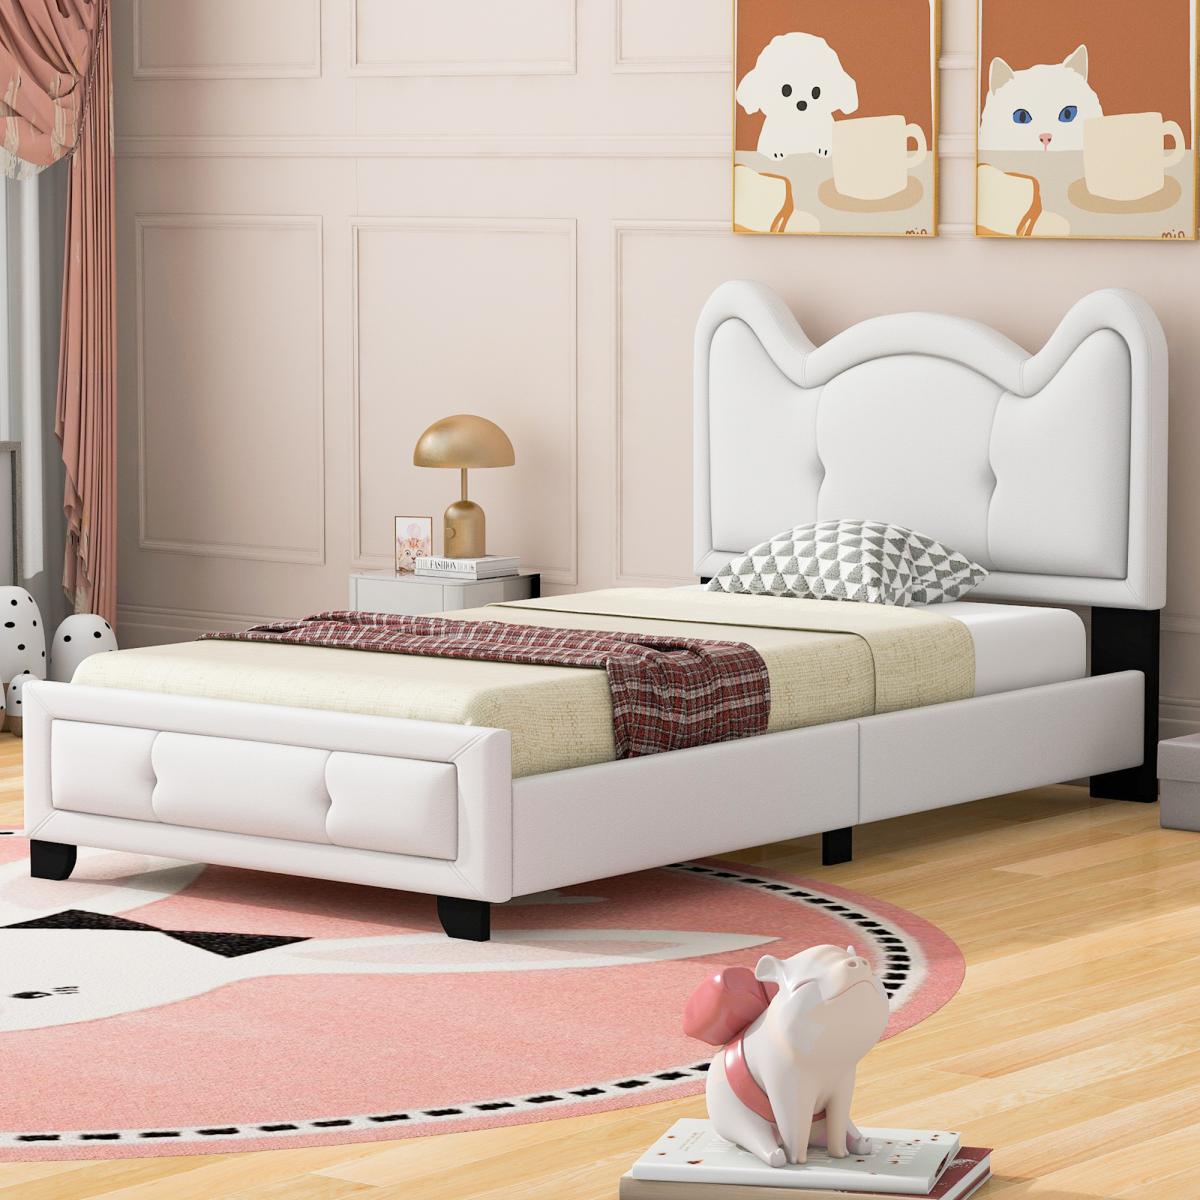 Twin Size Upholstered Platform Bed with Carton Ears Shaped Headboard, White